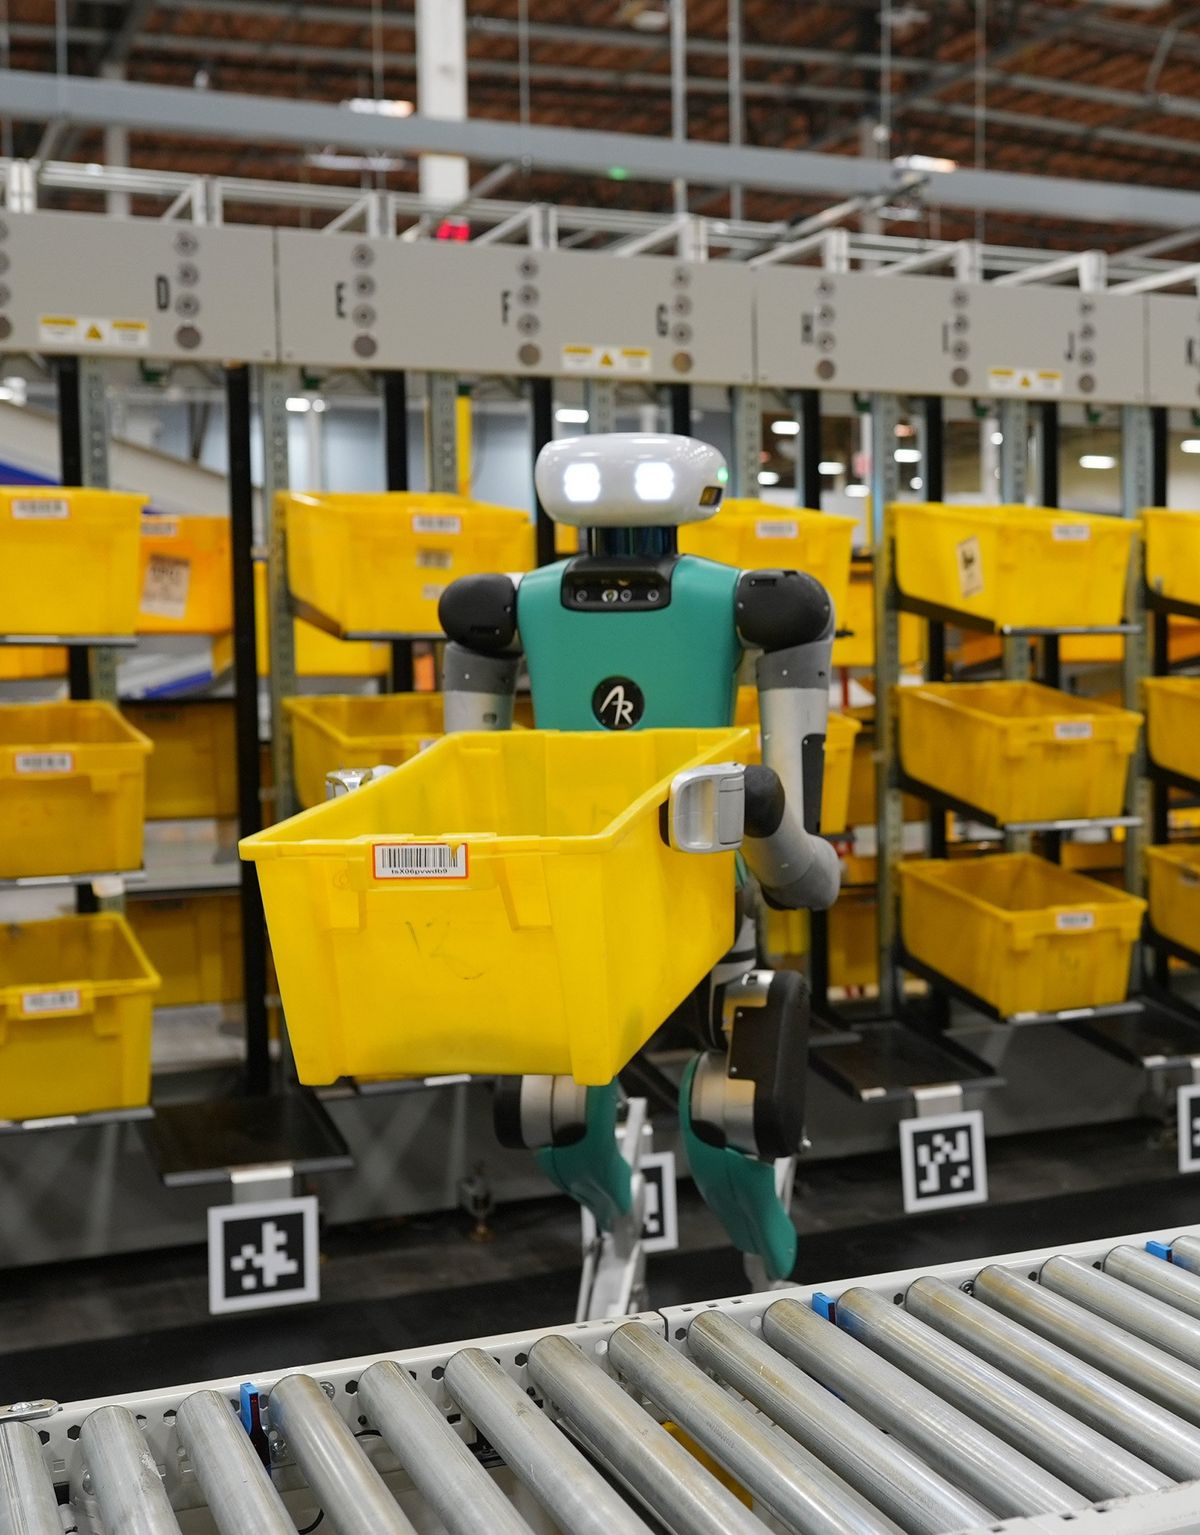 A photo of a robot holding a container in front of rows of containers.